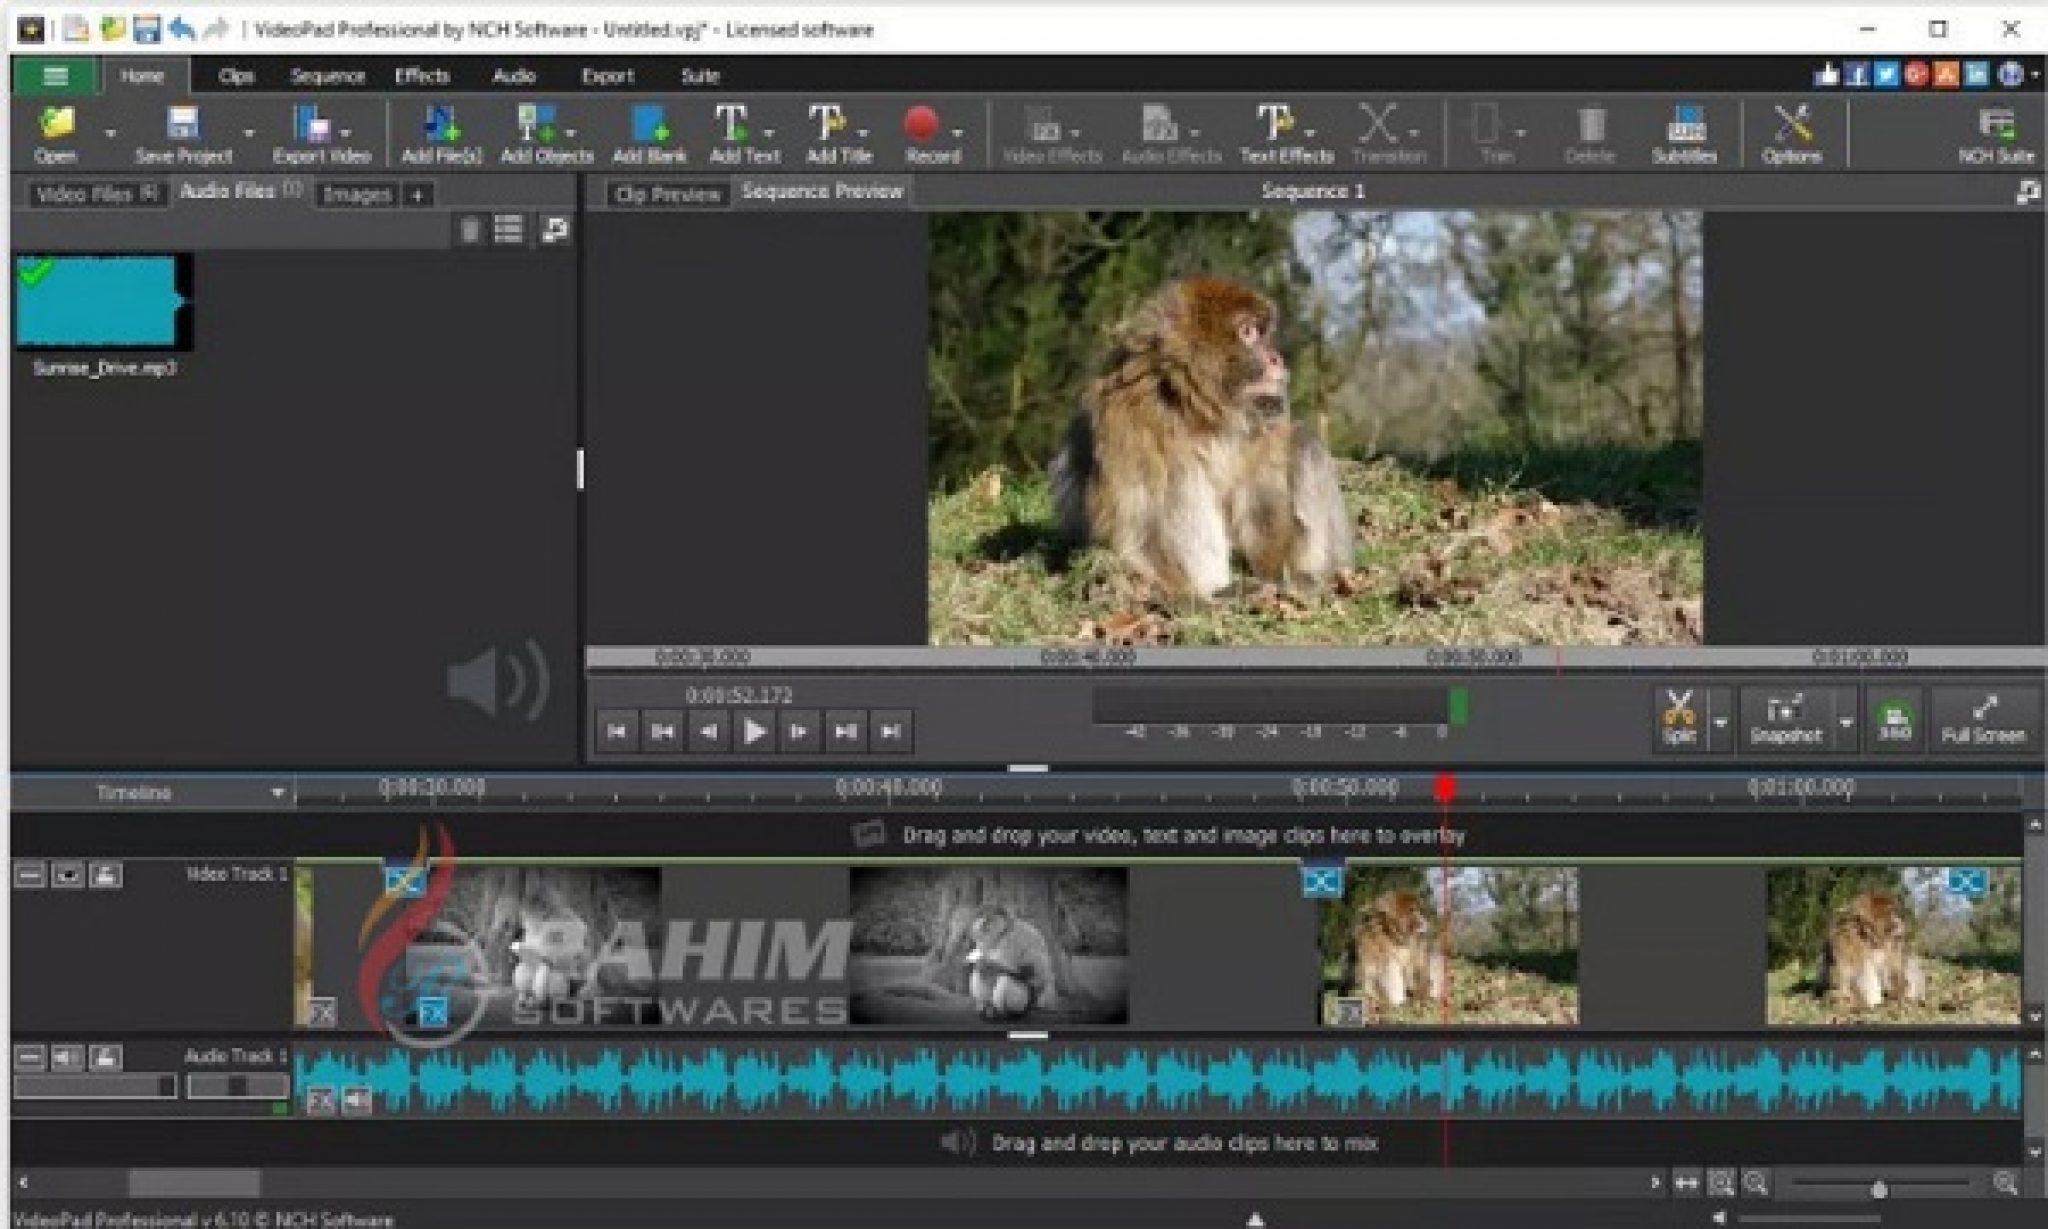 nch software videopad video editor free download